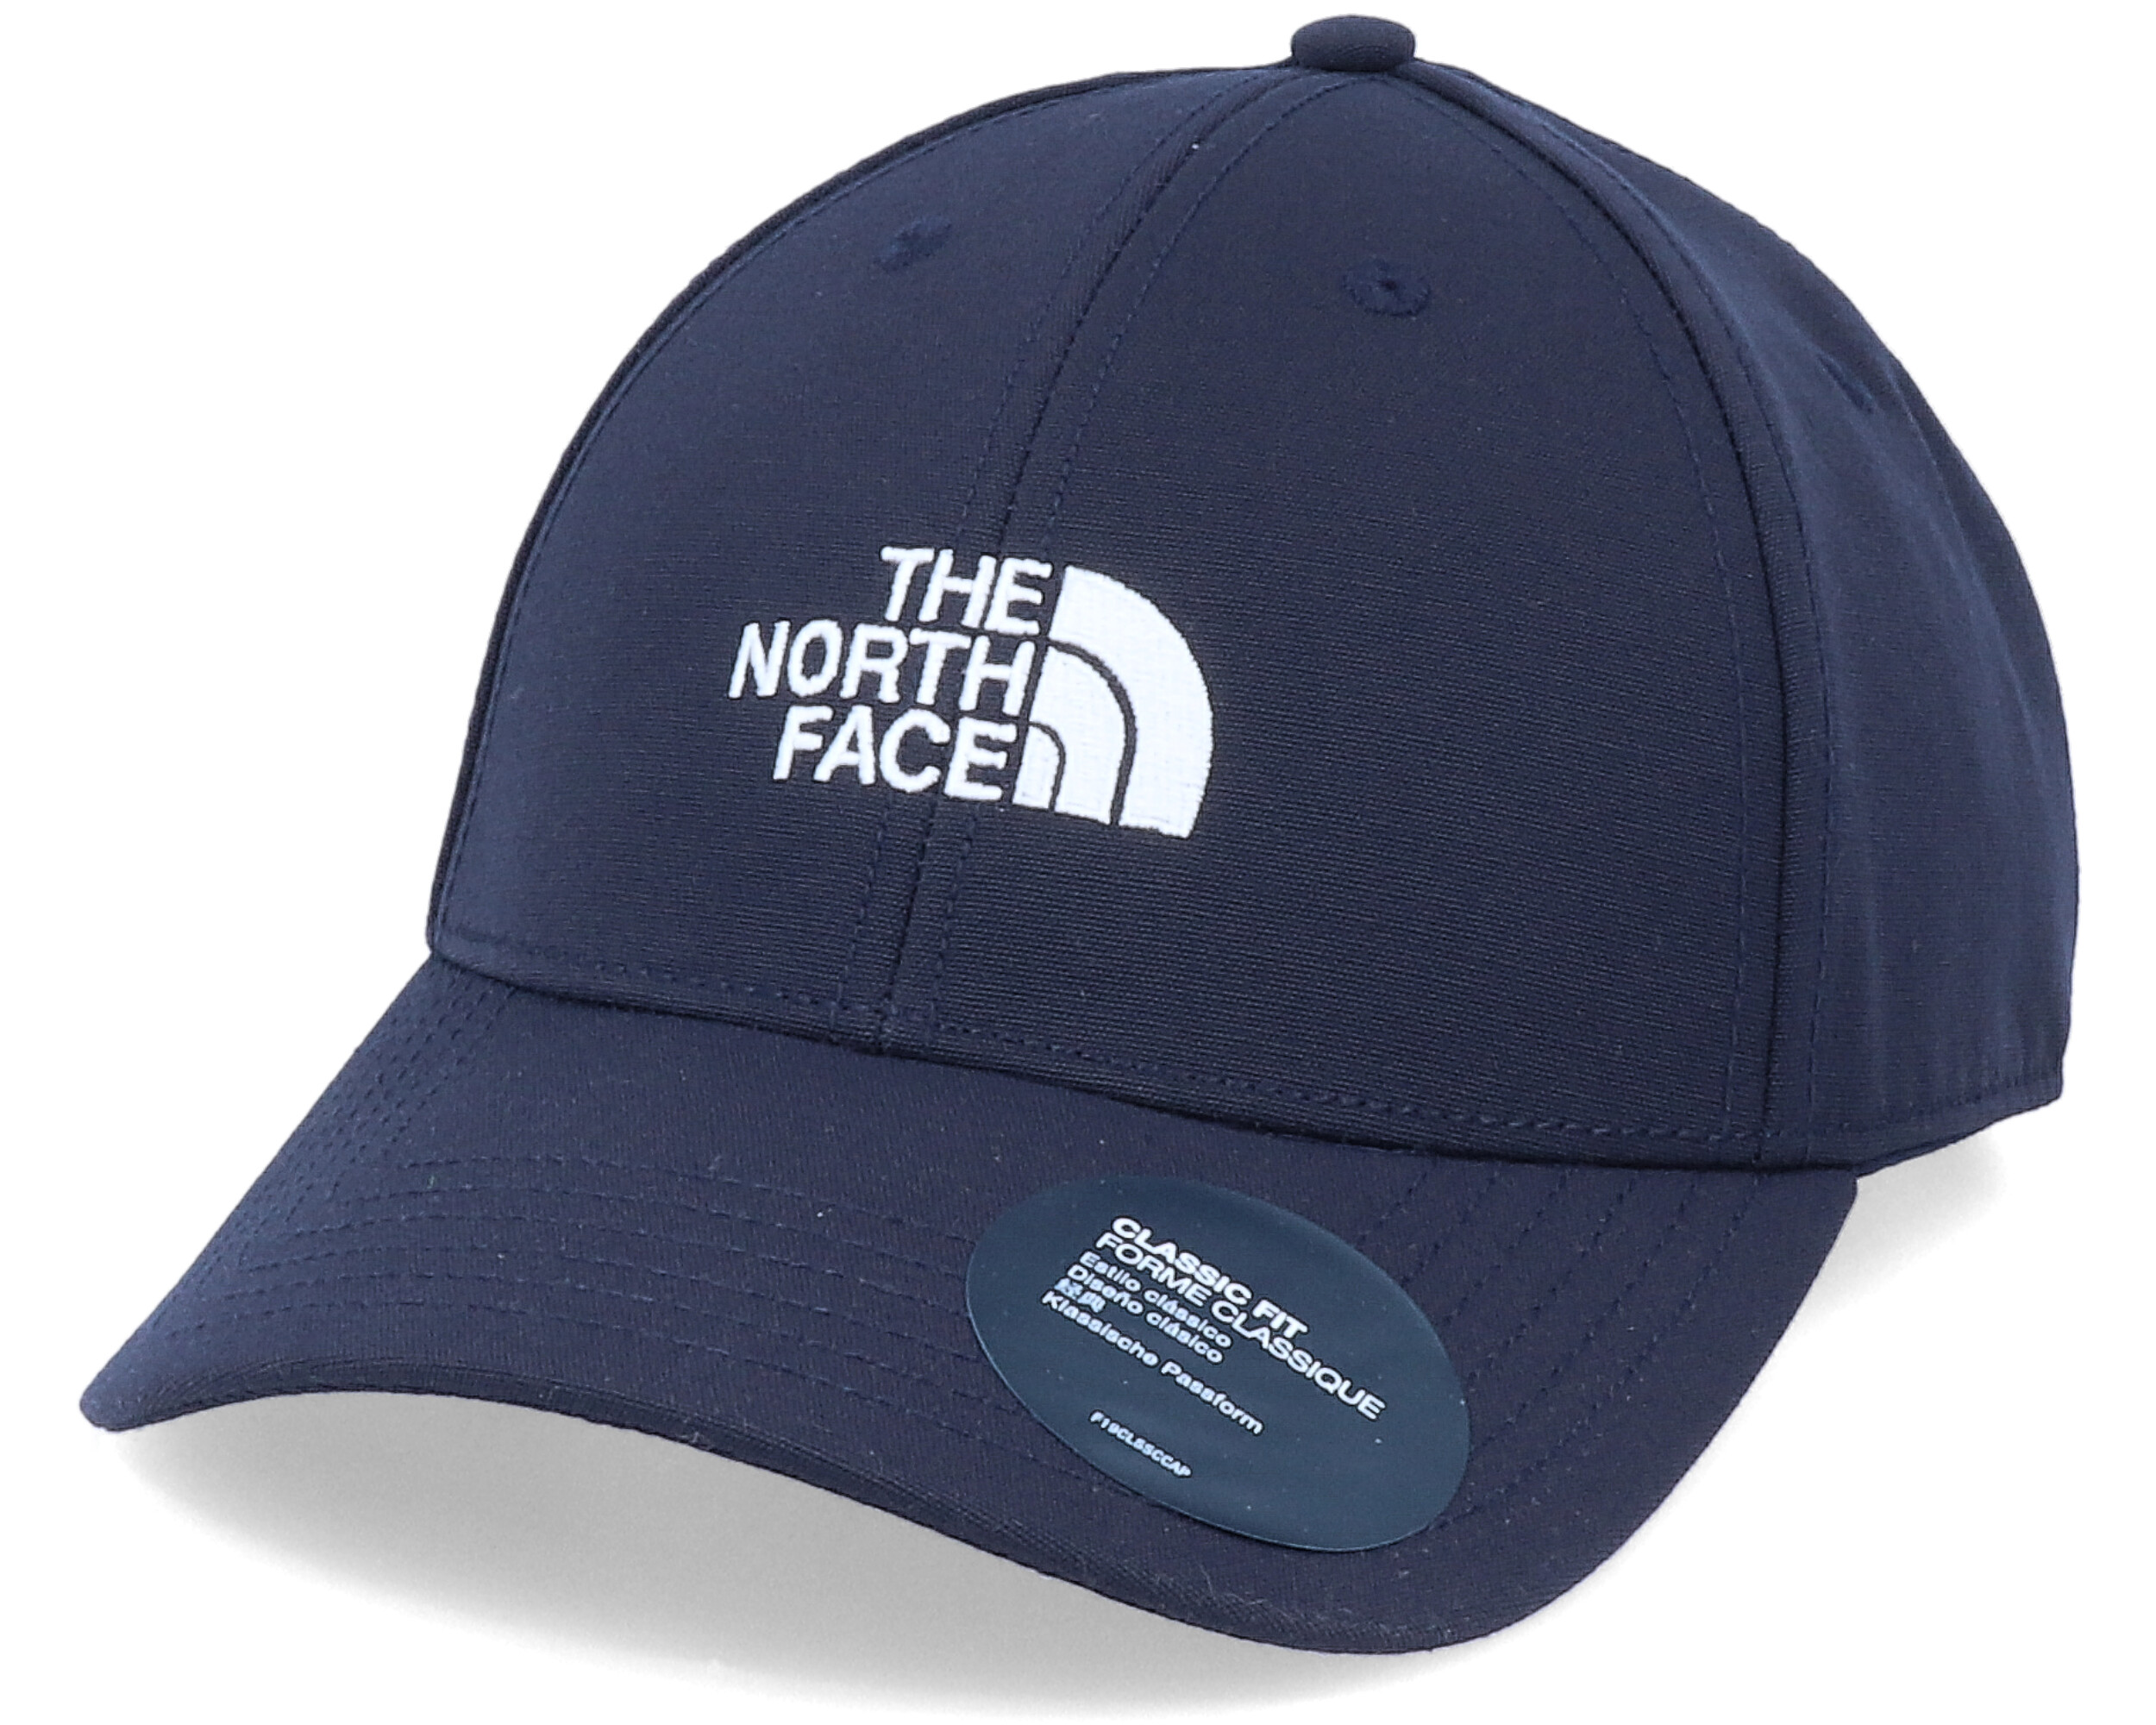 Recycled 66 Classic Hat Navy Adjustable - The North Face caps ...